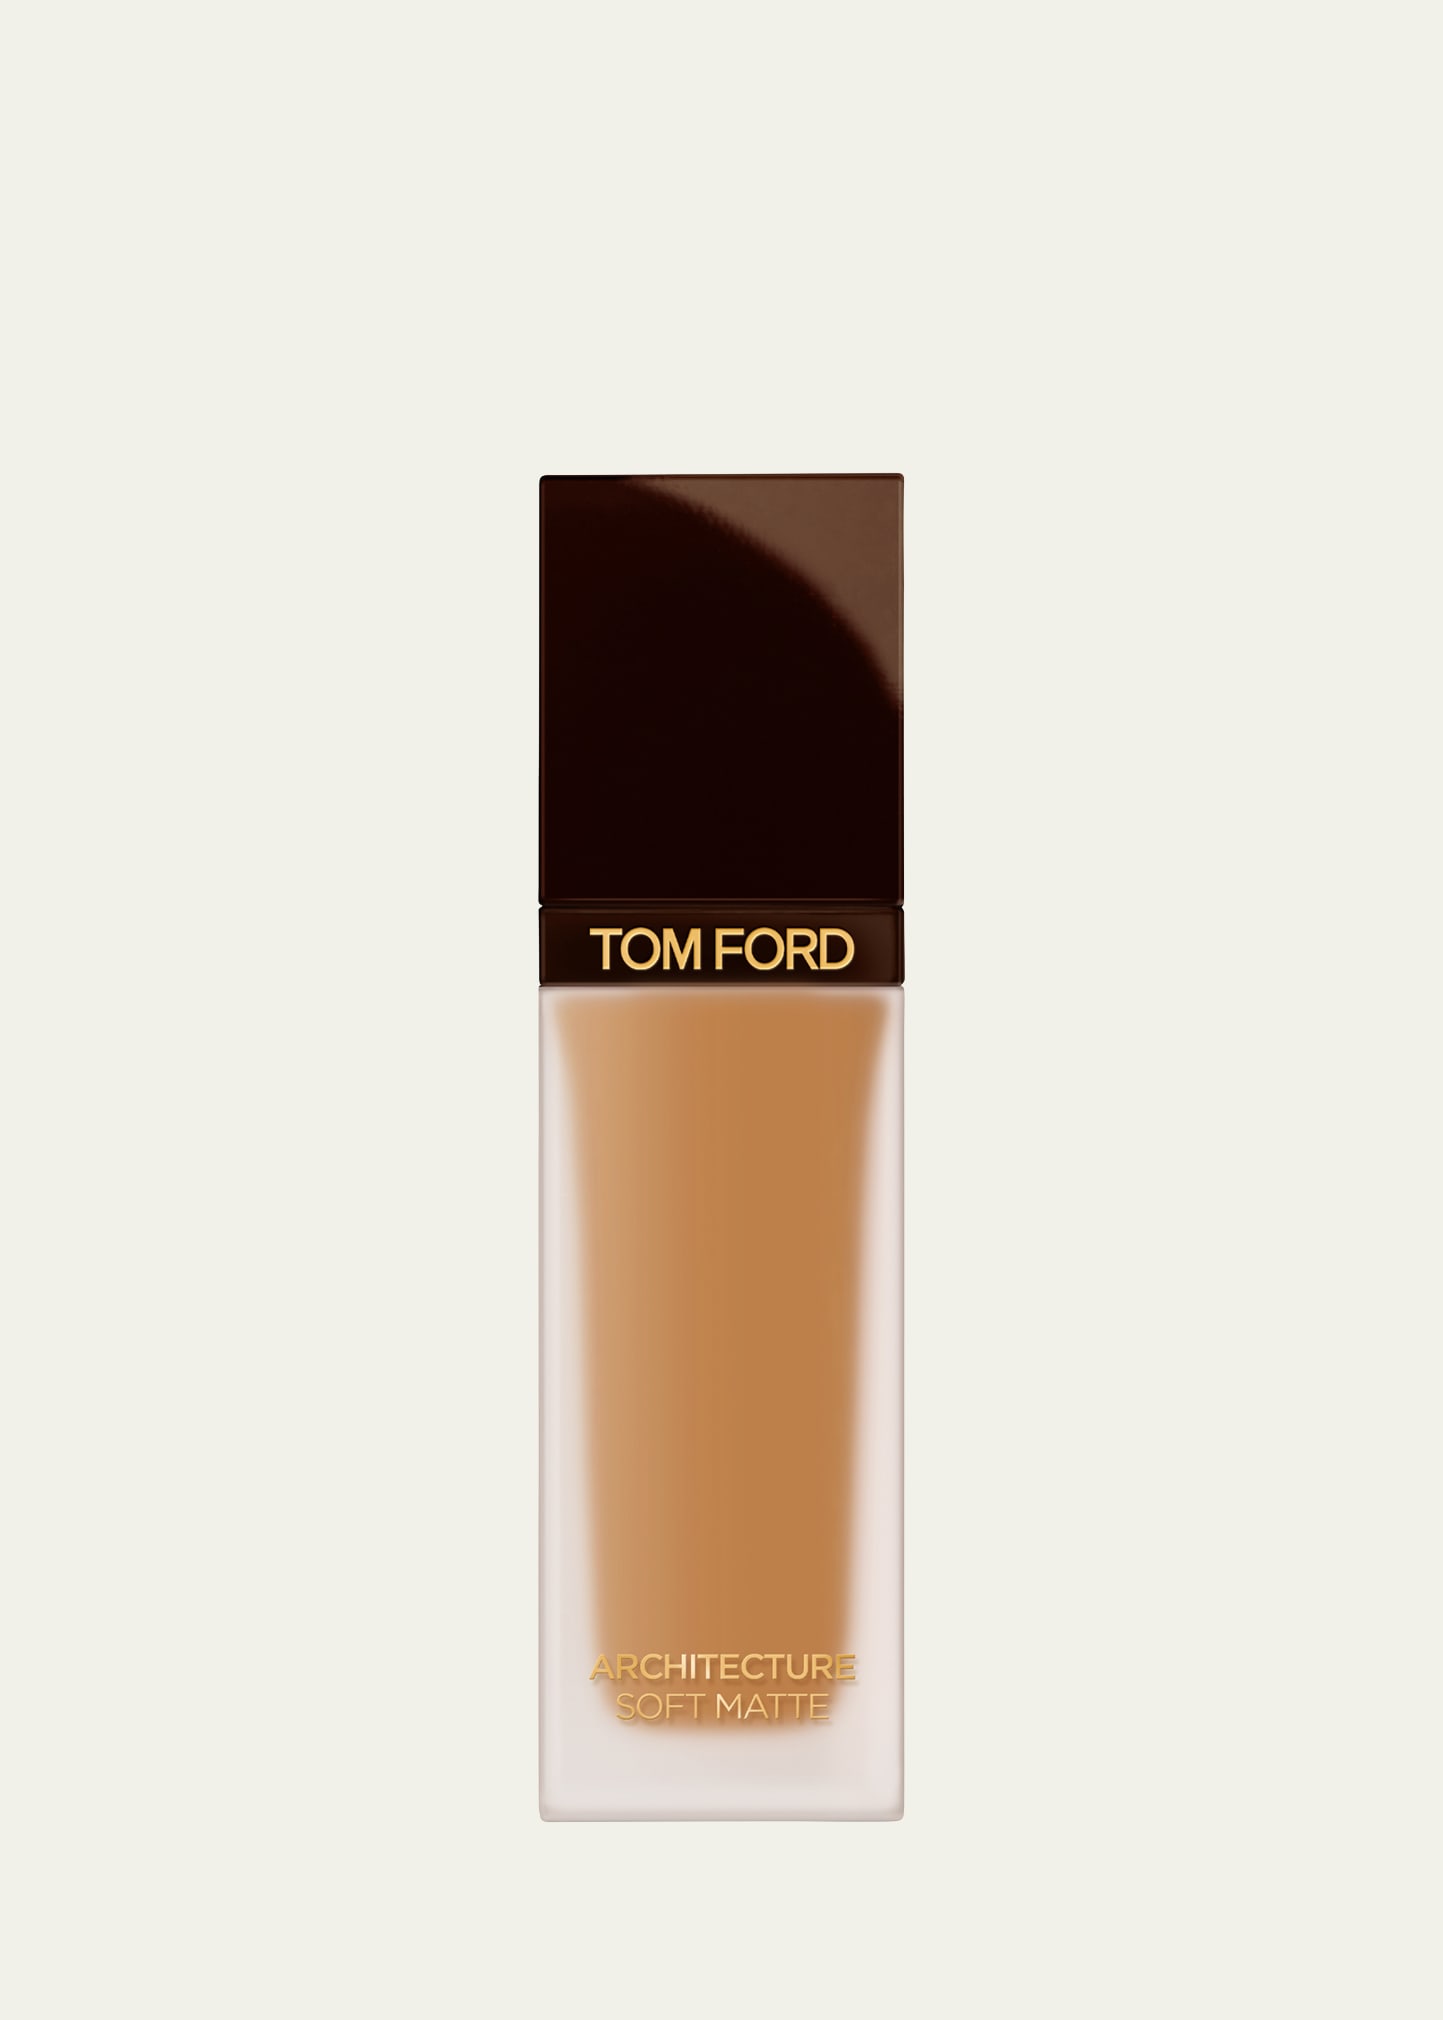 Tom Ford Architecture Soft Matte Foundation In Asm - 8.7 Golden